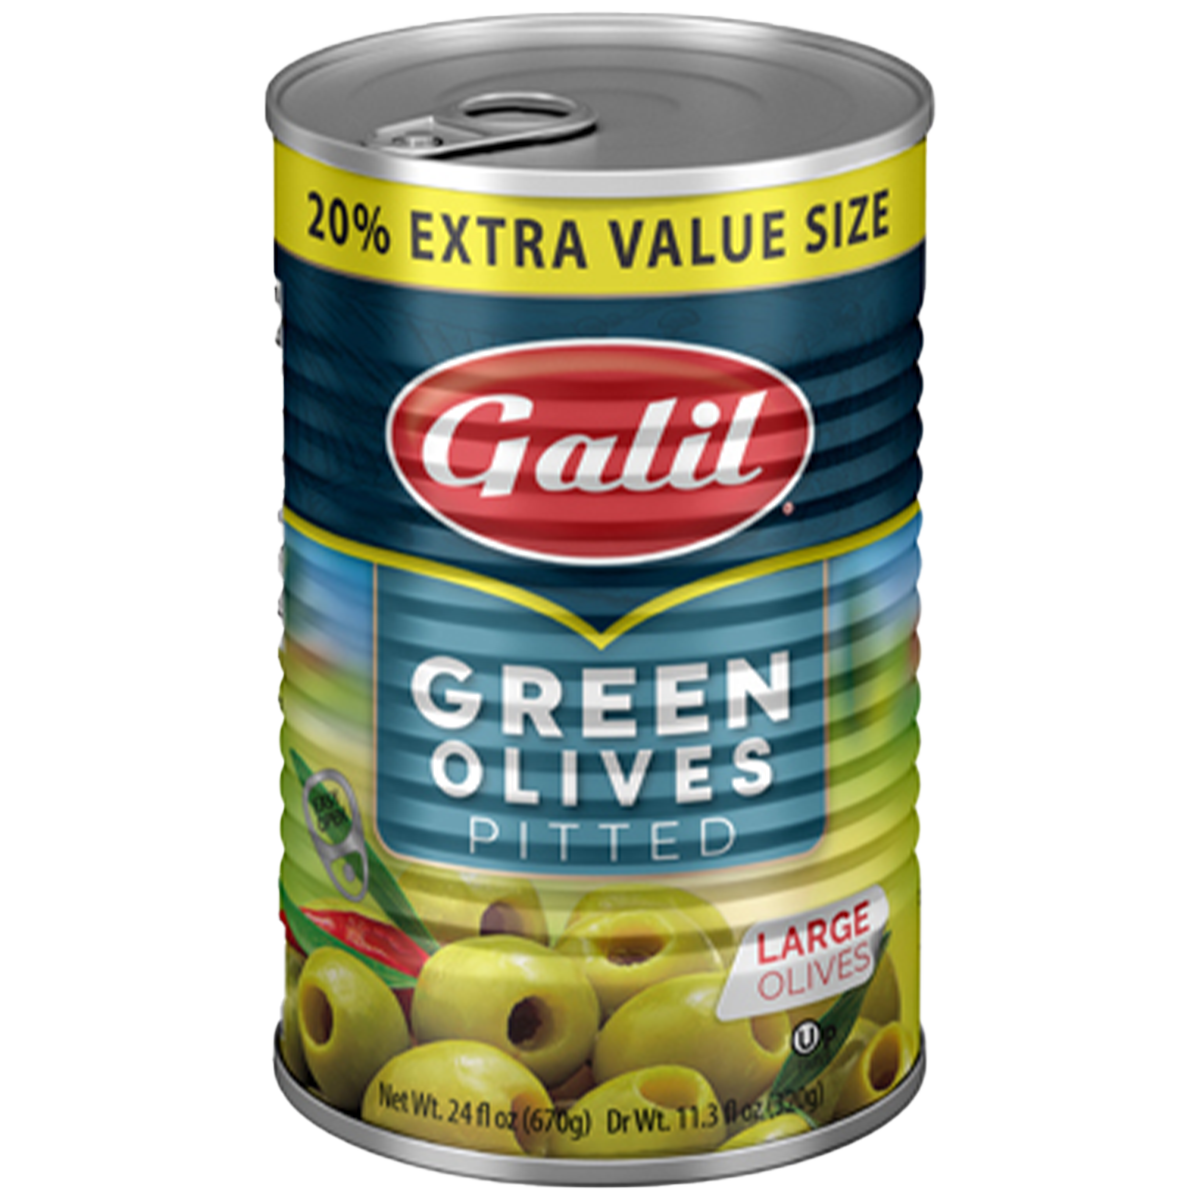 Green Olives | Large Pitted | 24 oz | Galil